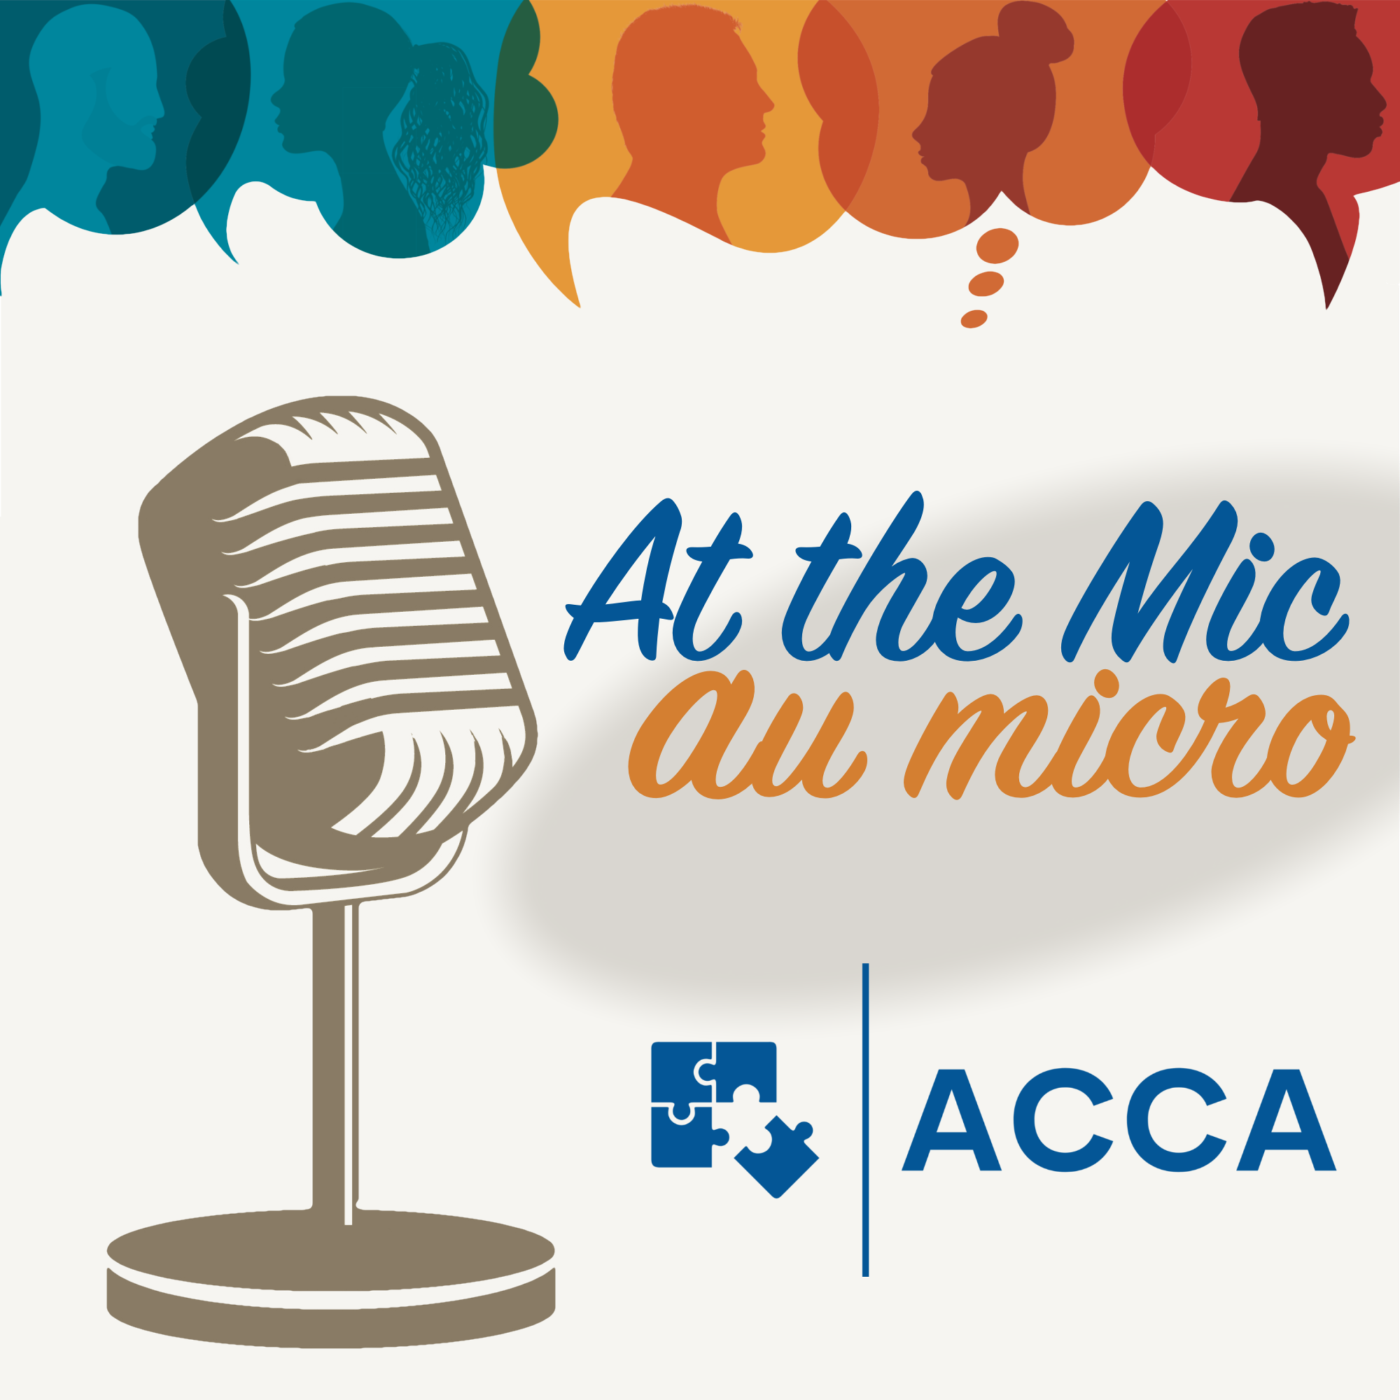 Introducing At The Mic / Au micro